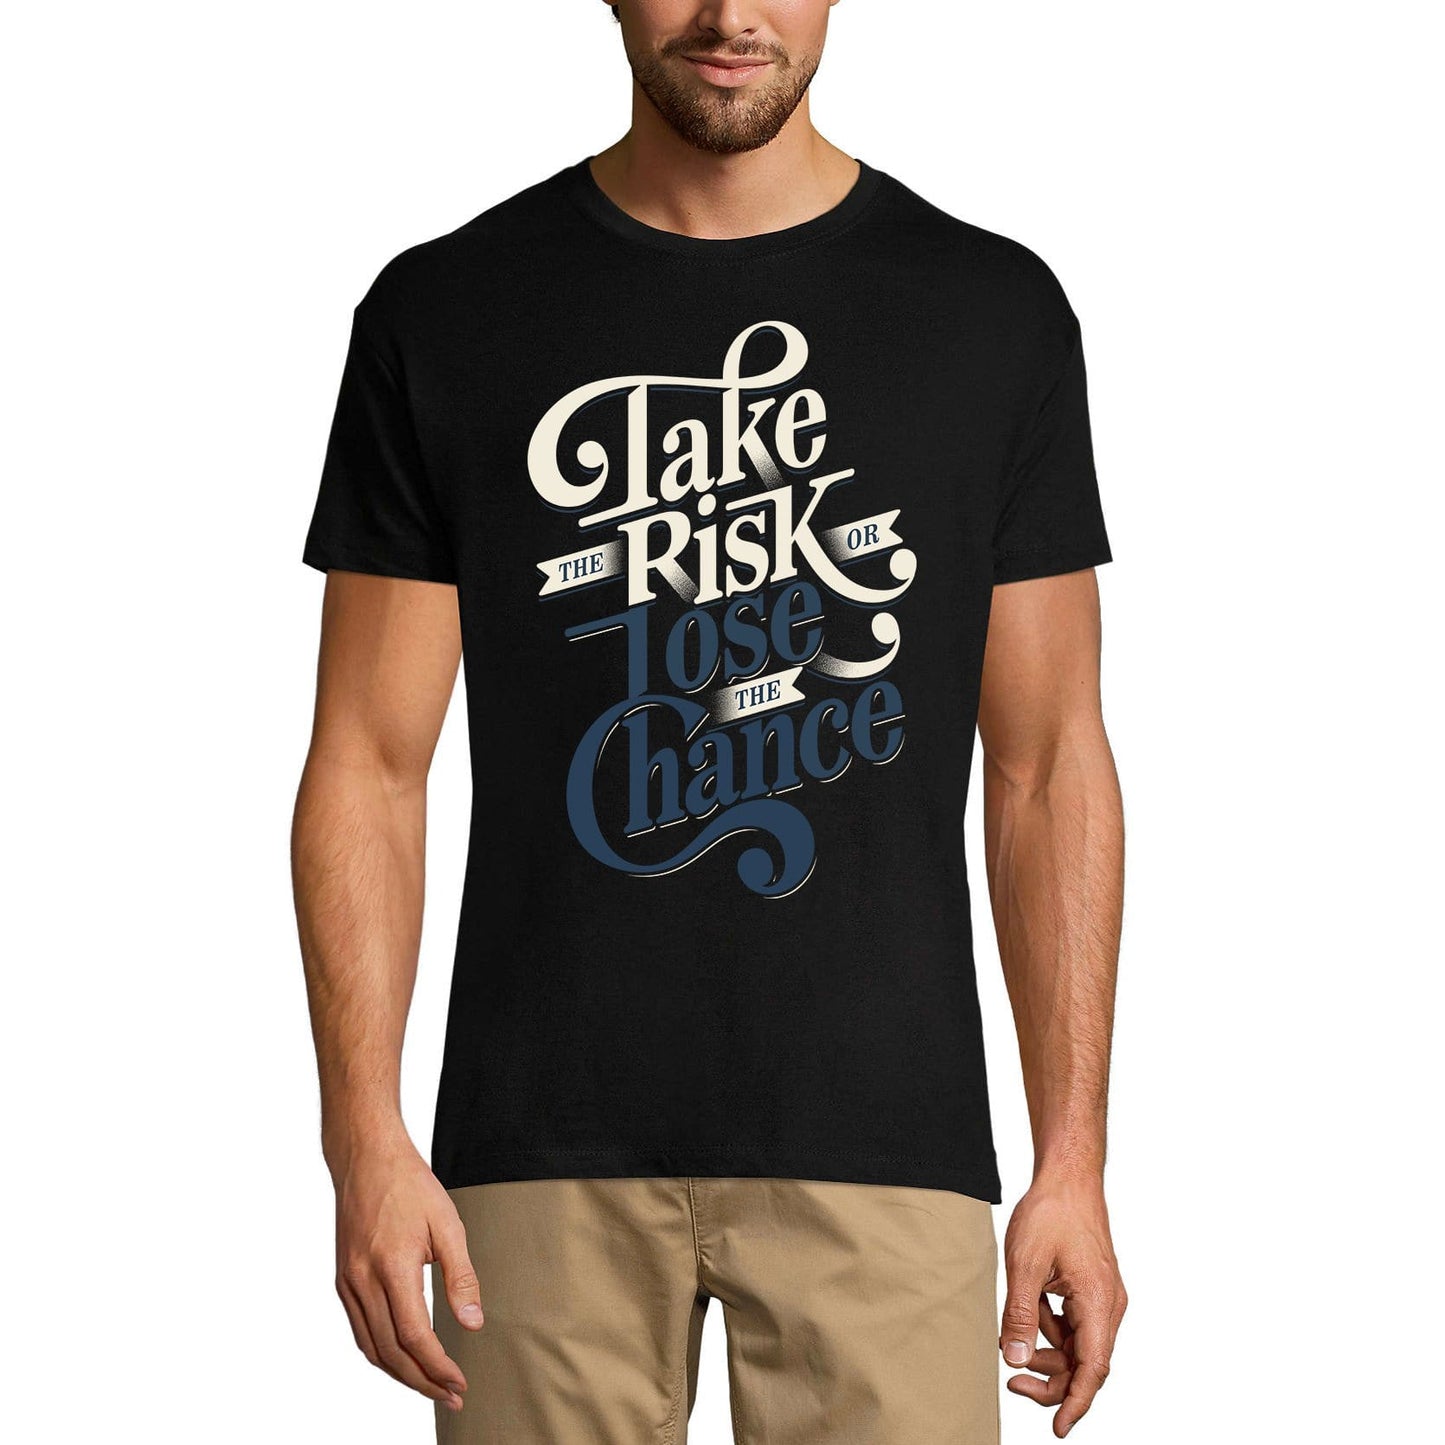 ULTRABASIC Men's T-Shirt Take the risk or lose the chance - Short Sleeve Tee shirt